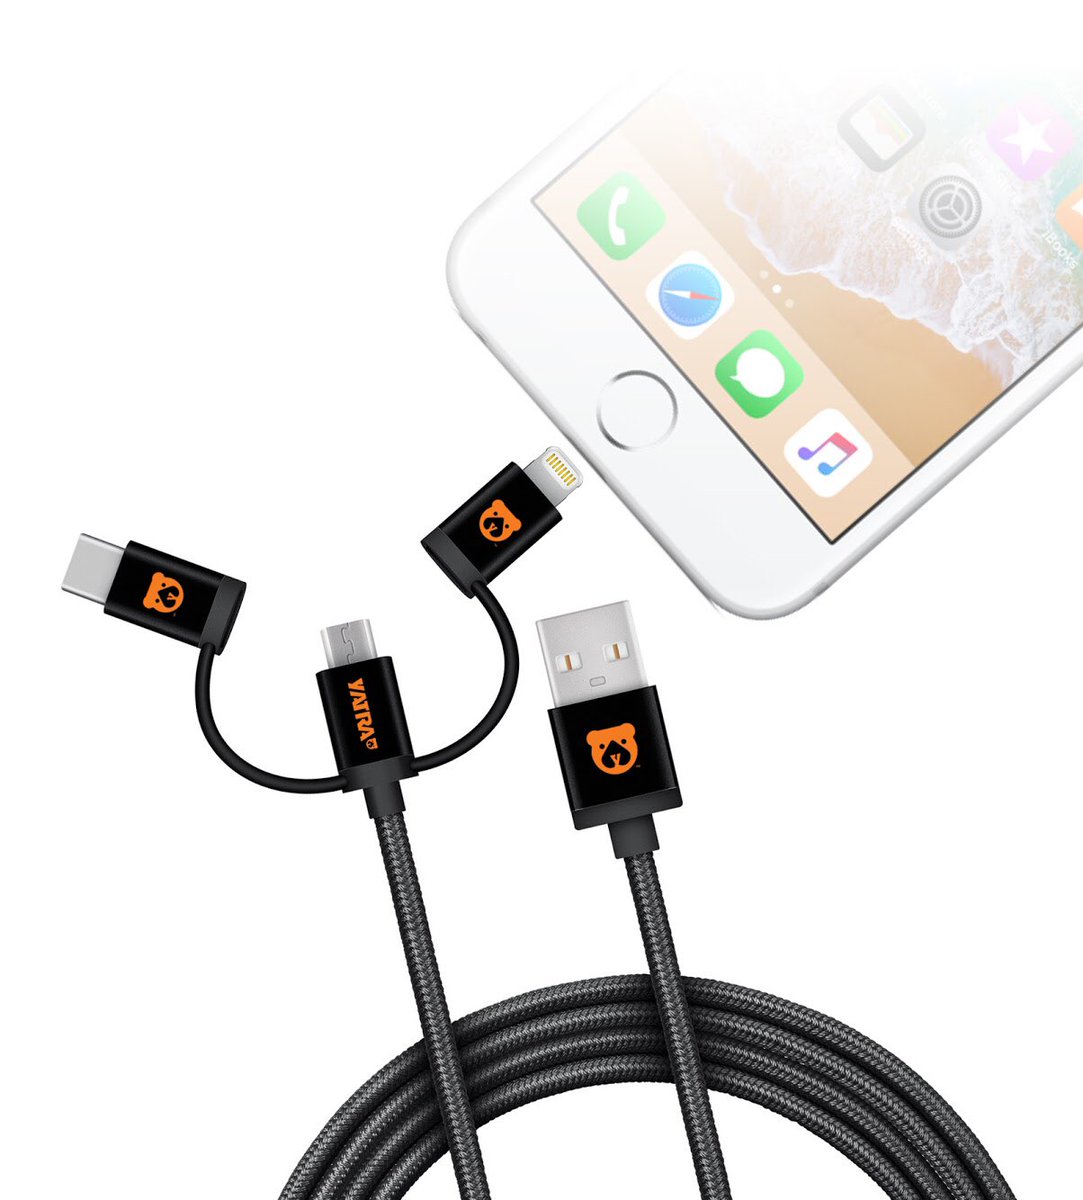 Our *NEW* 3 in 1 cables are🔥 #shopyatra #3in1cable #chargingsolutions #yatragolf #mobilecharging #yatrafastcharge #shopyatra #chargingsolutions #mobilecharger #mobilephonecharger #phonechargingsolutions #wirelesstech  #chargeonthego